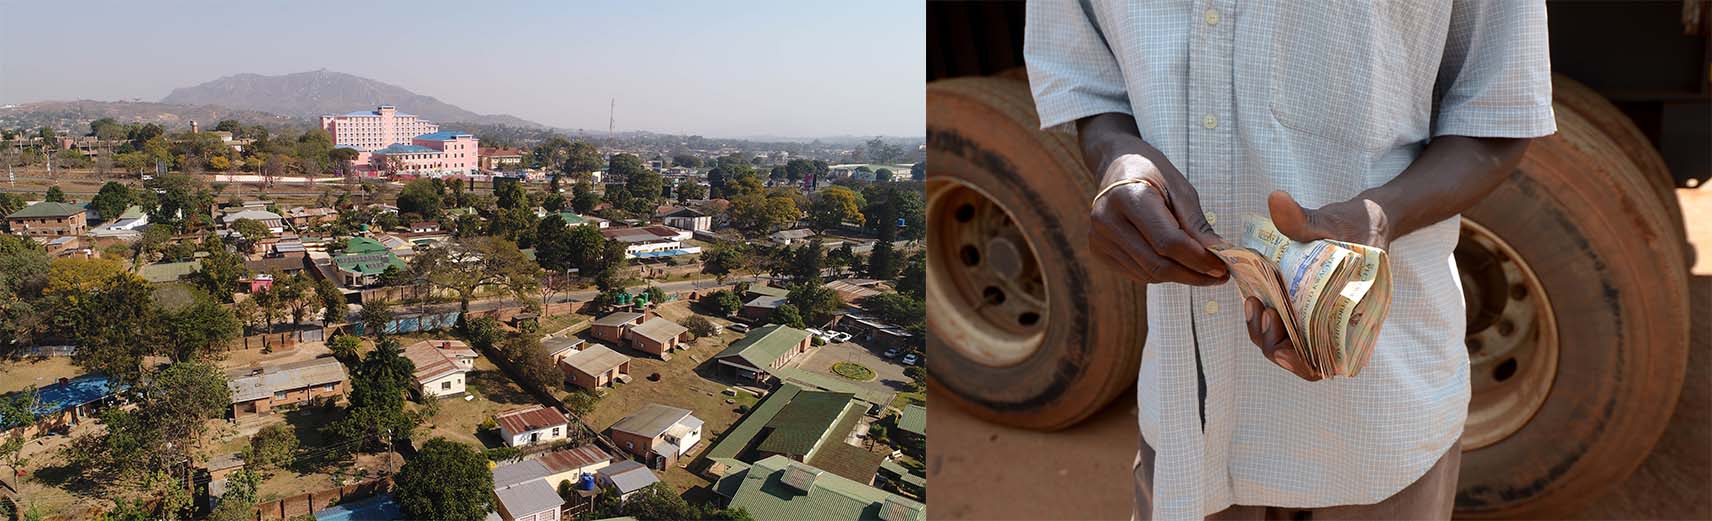 Aerial view of a city next to a photo of a man's hands counting money